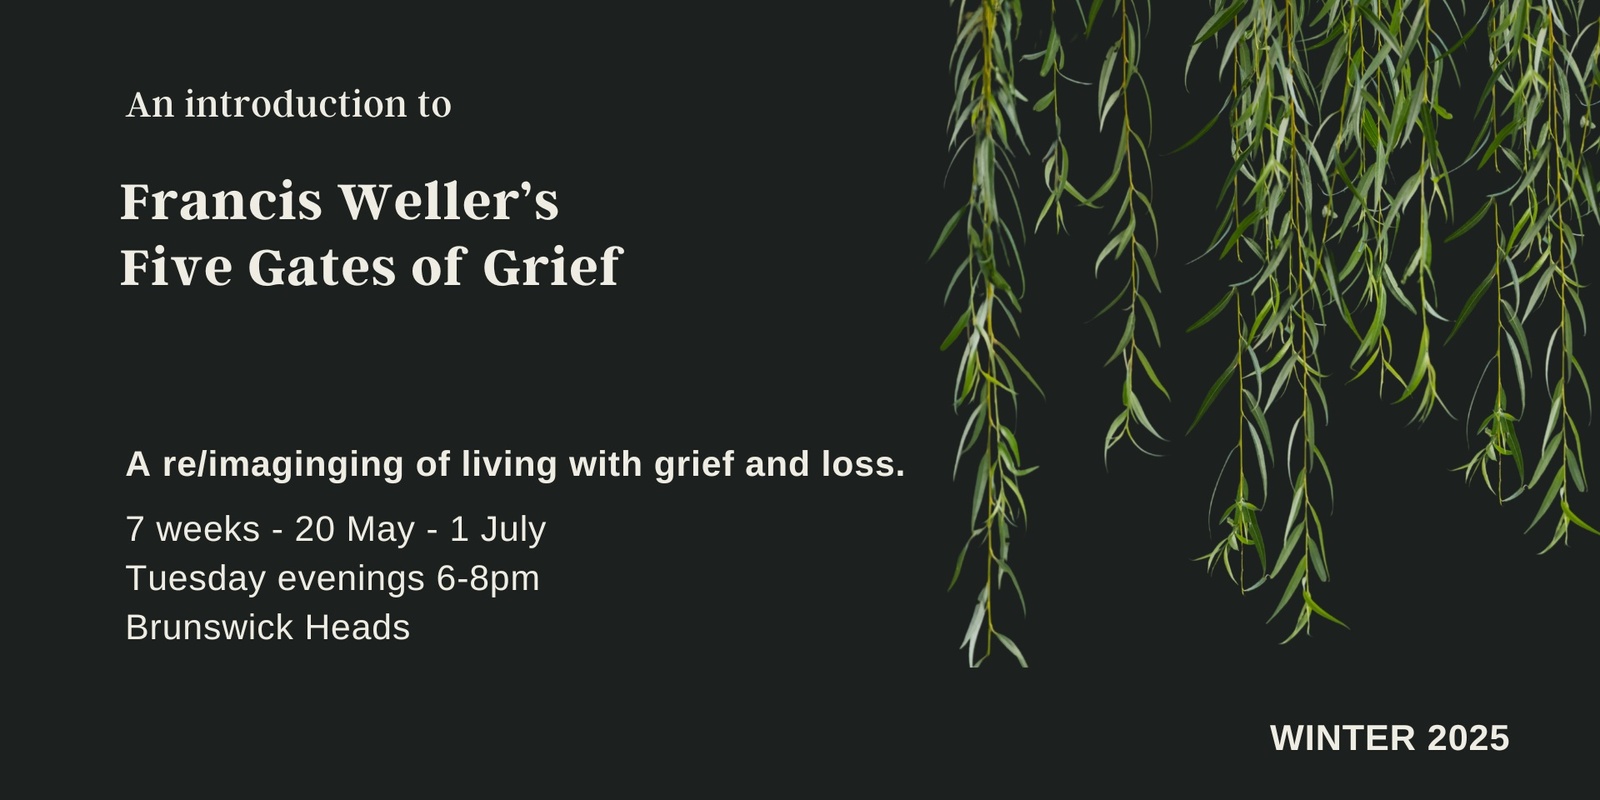 Banner image for An Introduction to Francis Weller's Five Gates of Grief - WINTER 2025